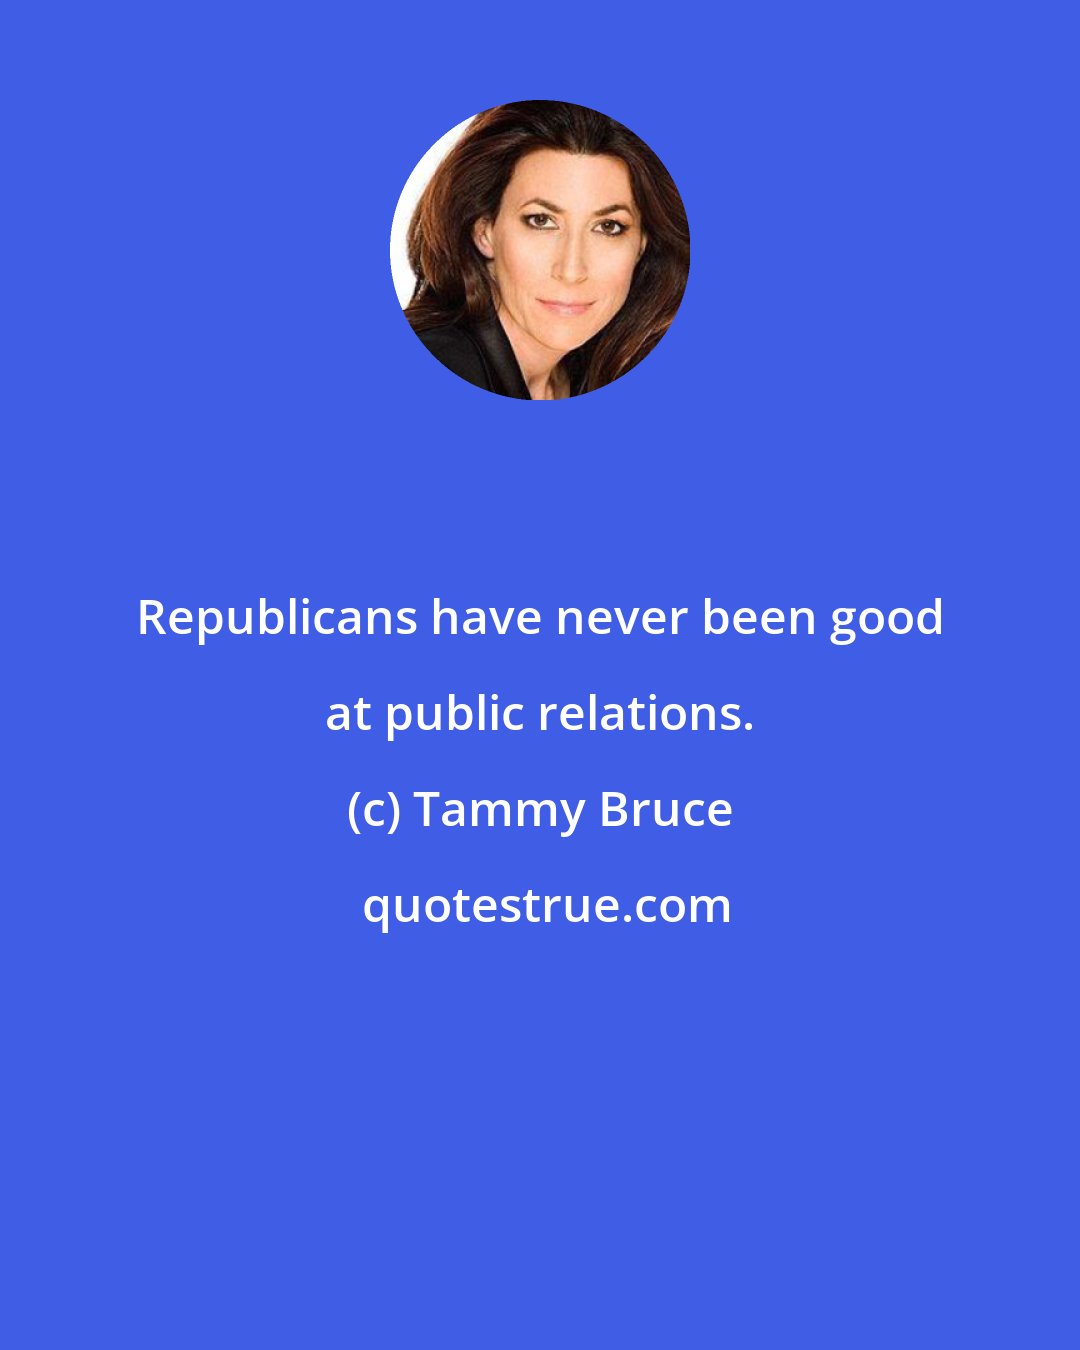 Tammy Bruce: Republicans have never been good at public relations.